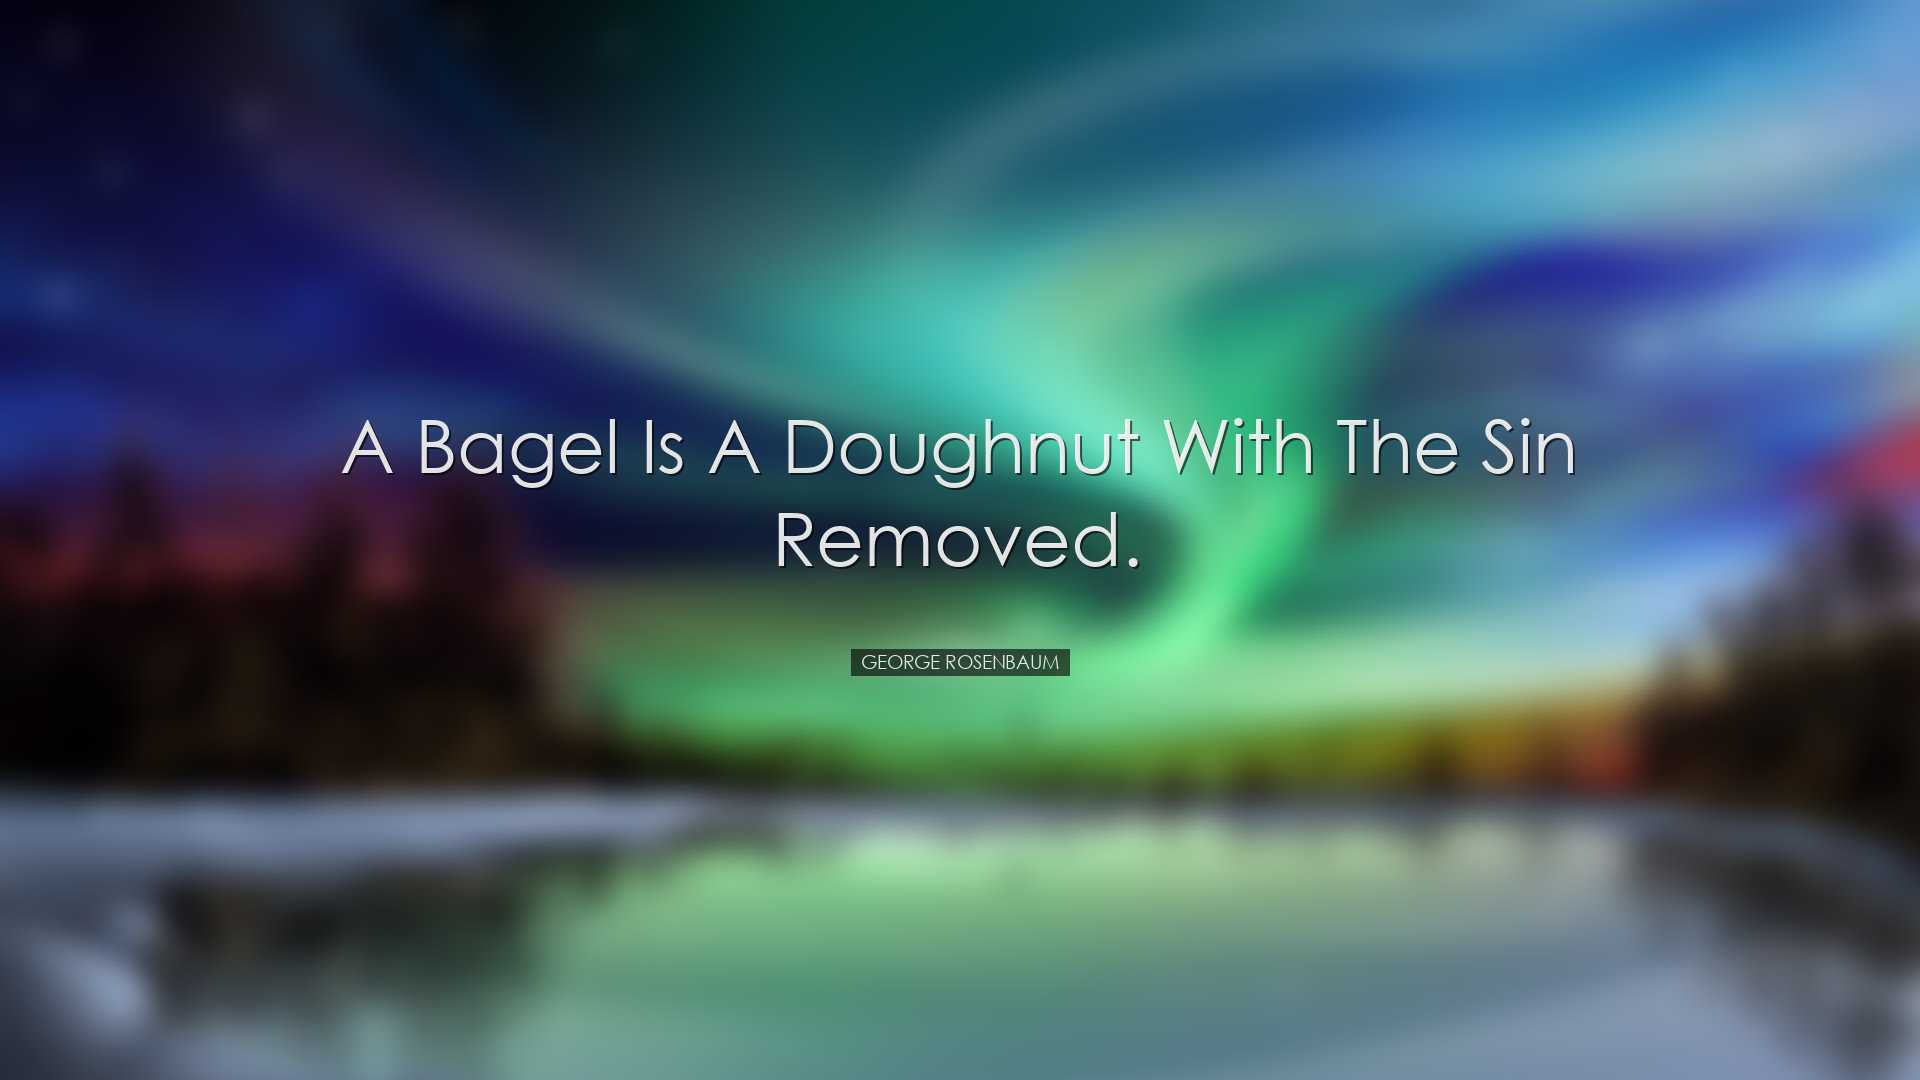 A bagel is a doughnut with the sin removed. - George Rosenbaum